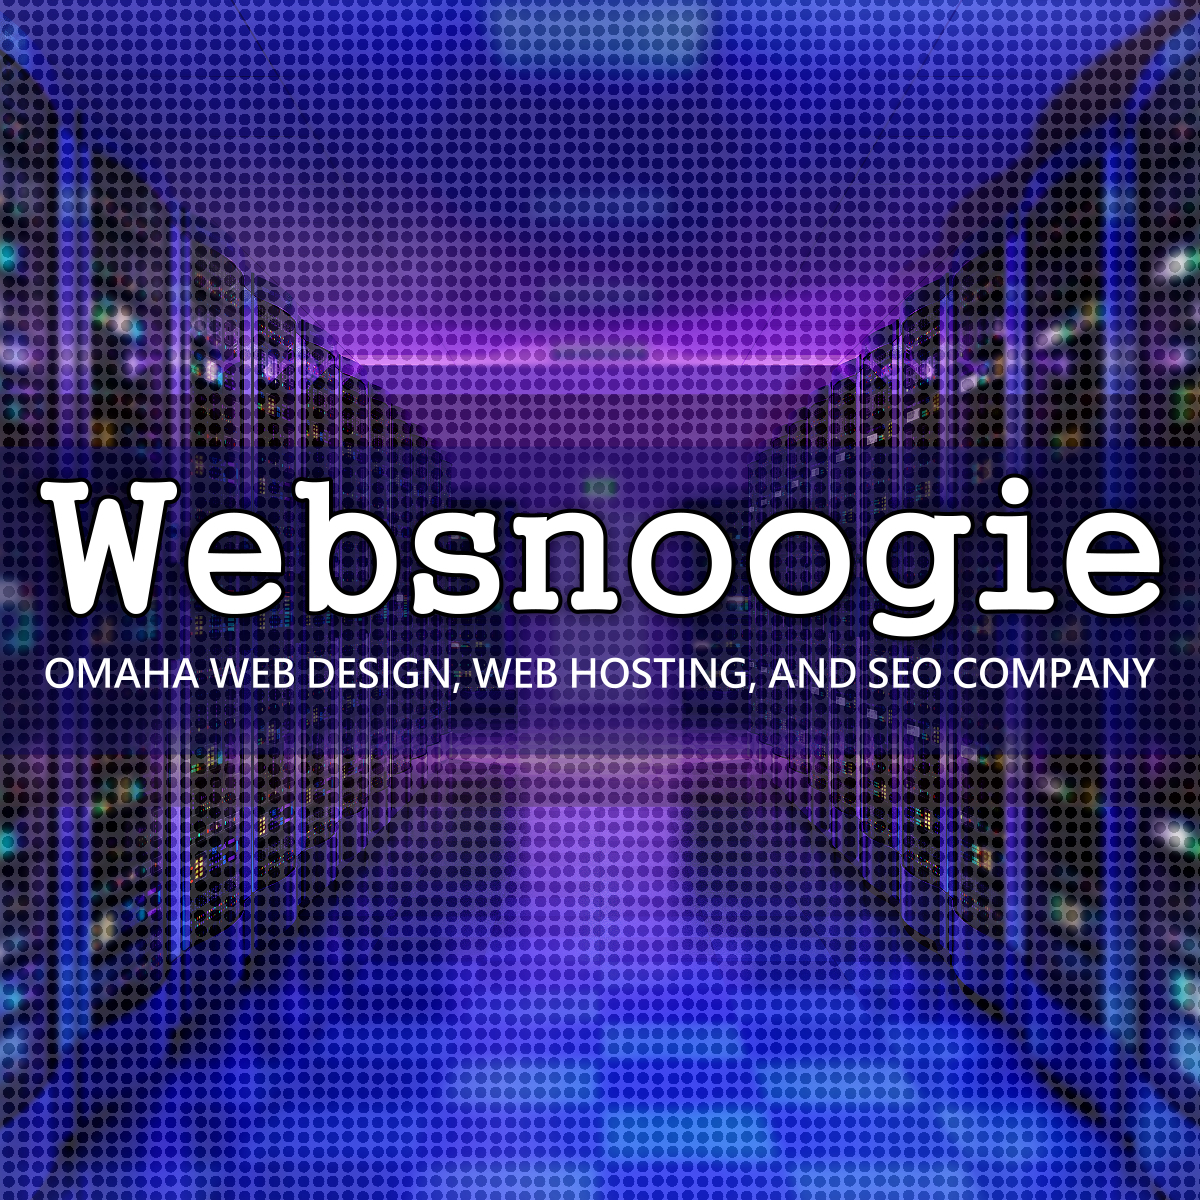 Websnoogie Announces Major Price Cuts on Web Design & Hosting Services